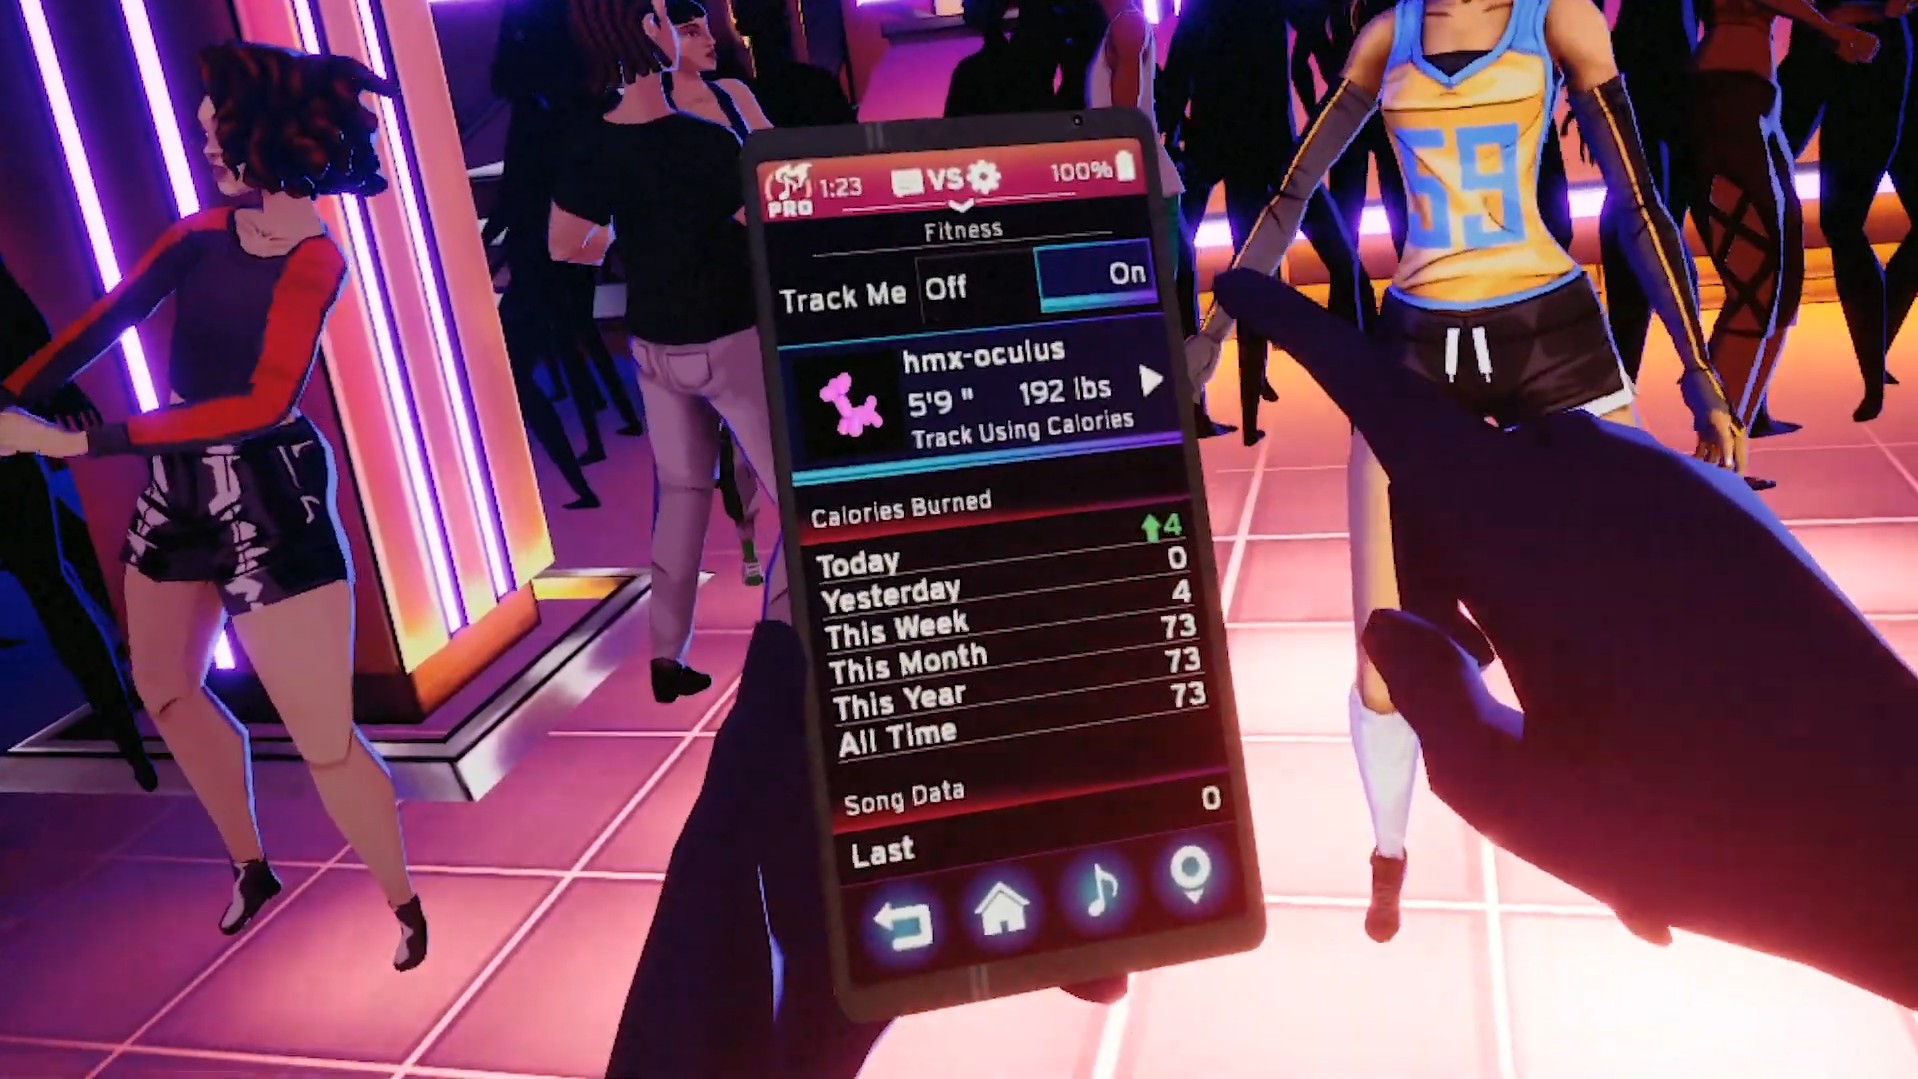 Screenshot from the VR game Dance Central (2019) Fitness Tracker